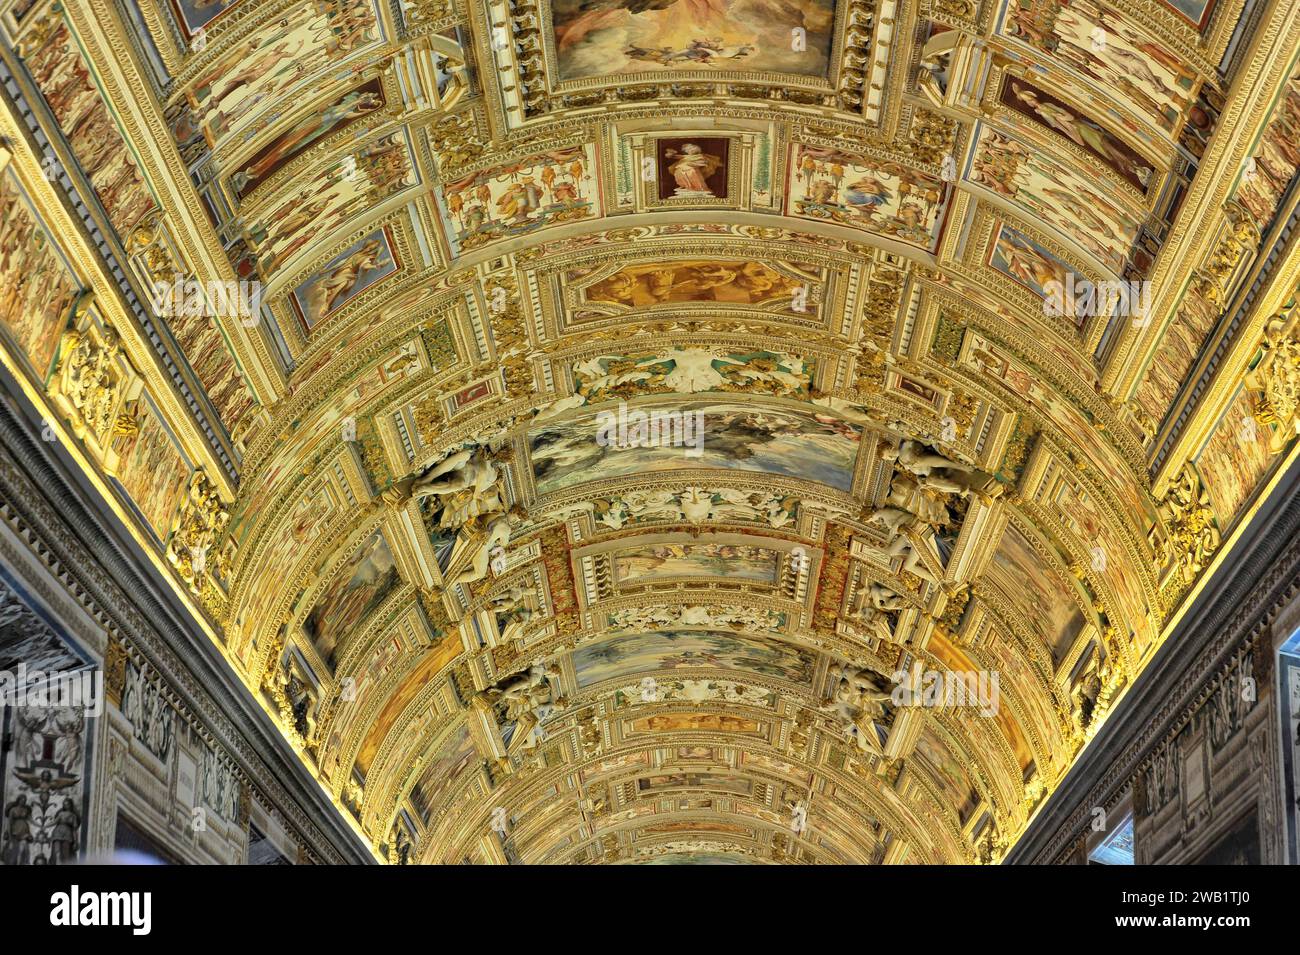 Ceiling painting, Galleria delle carte geografiche, Gallery of Maps, Hall of Maps, Vatican Museums, Vatican City, Vatican, Rome, Lazio, Italy Stock Photo